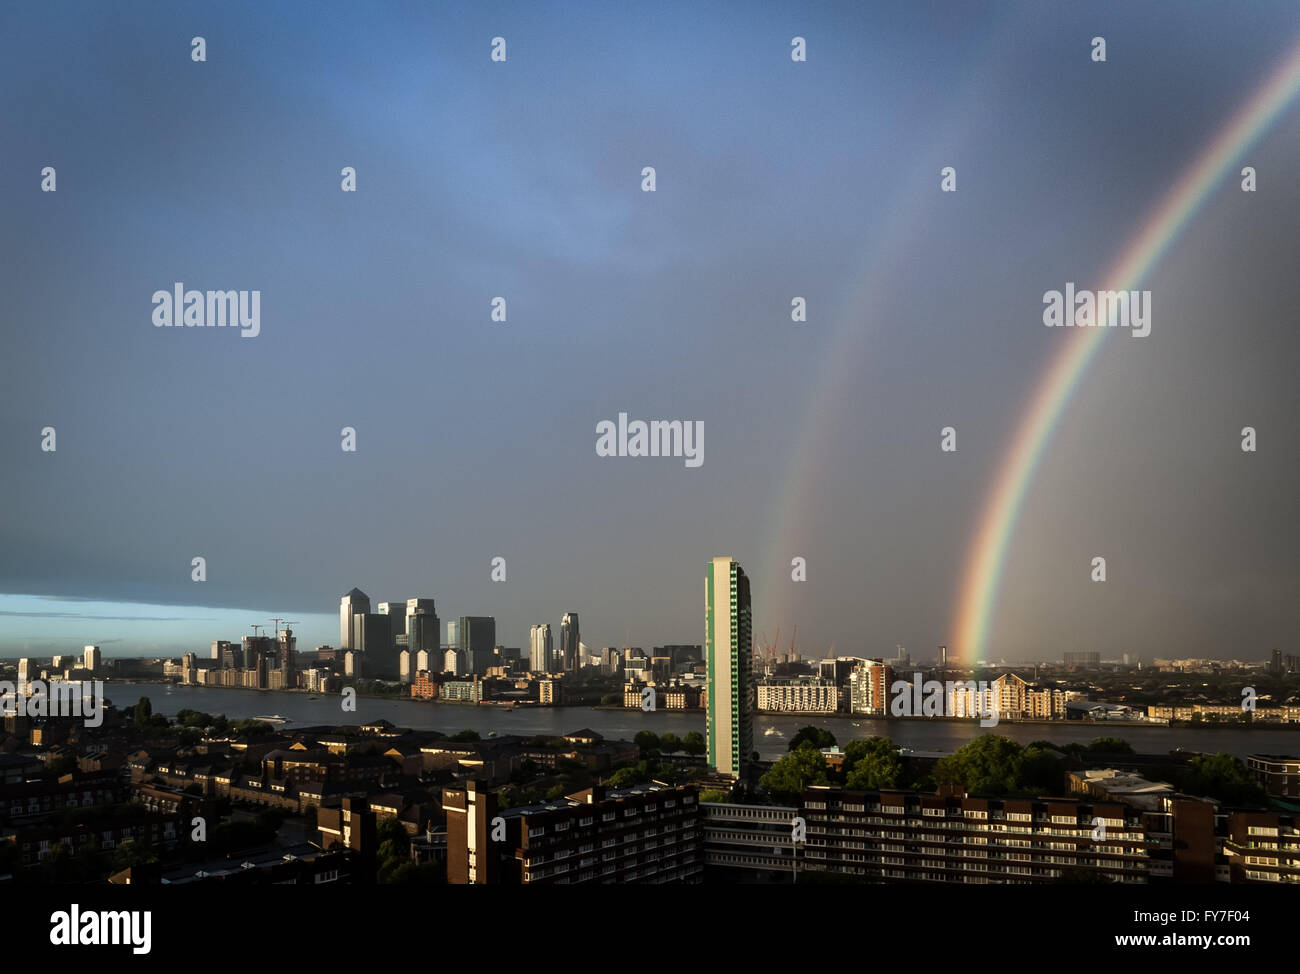 UK Weather: Colourful rainbow breaks after a rainstorm over south east London including Canary Wharf business park buildings Stock Photo